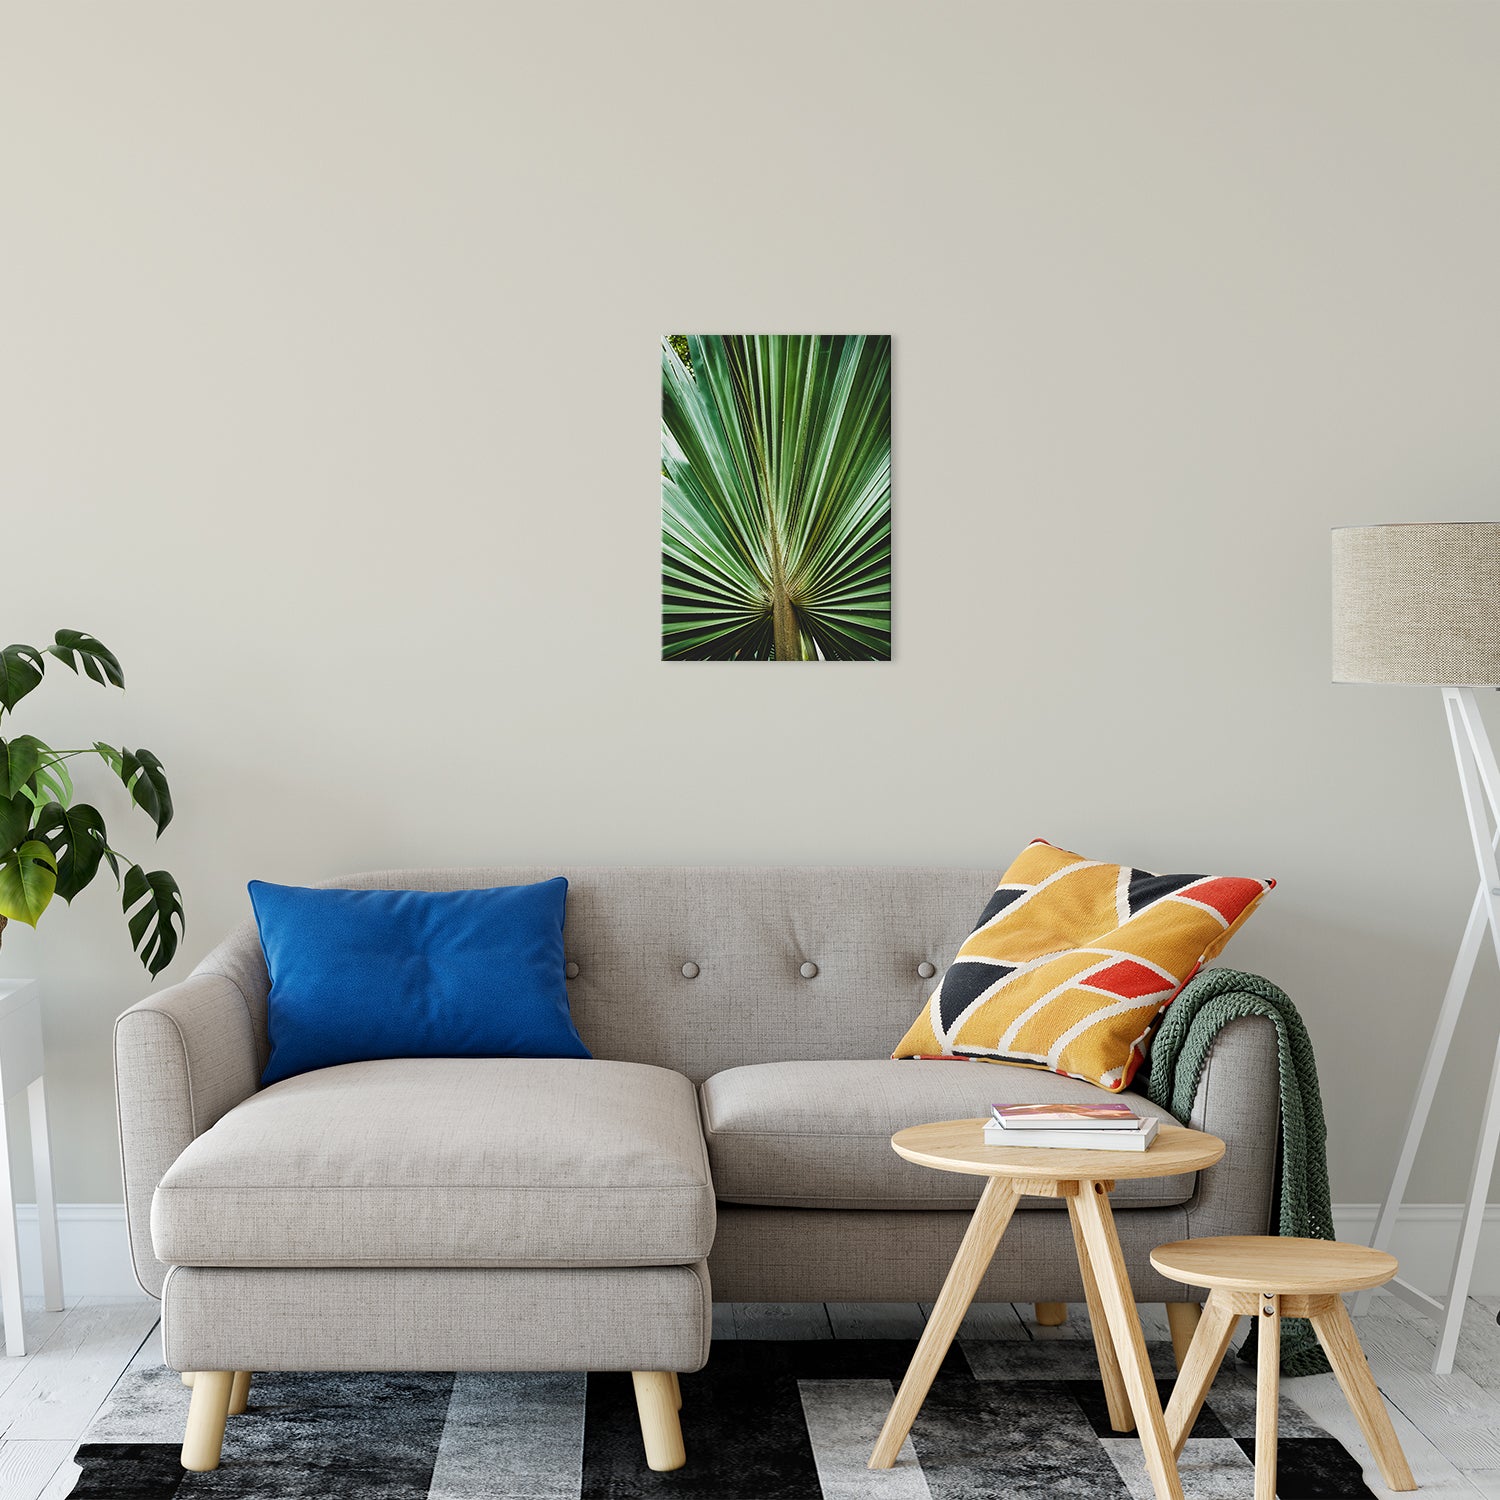 Tropical Abstract Wall Art: Aged & Colorized Wide Palm Leaves 2 Nature / Botanical Photo Fine Art Canvas Wall Art Prints 16" x 20" - PIPAFINEART